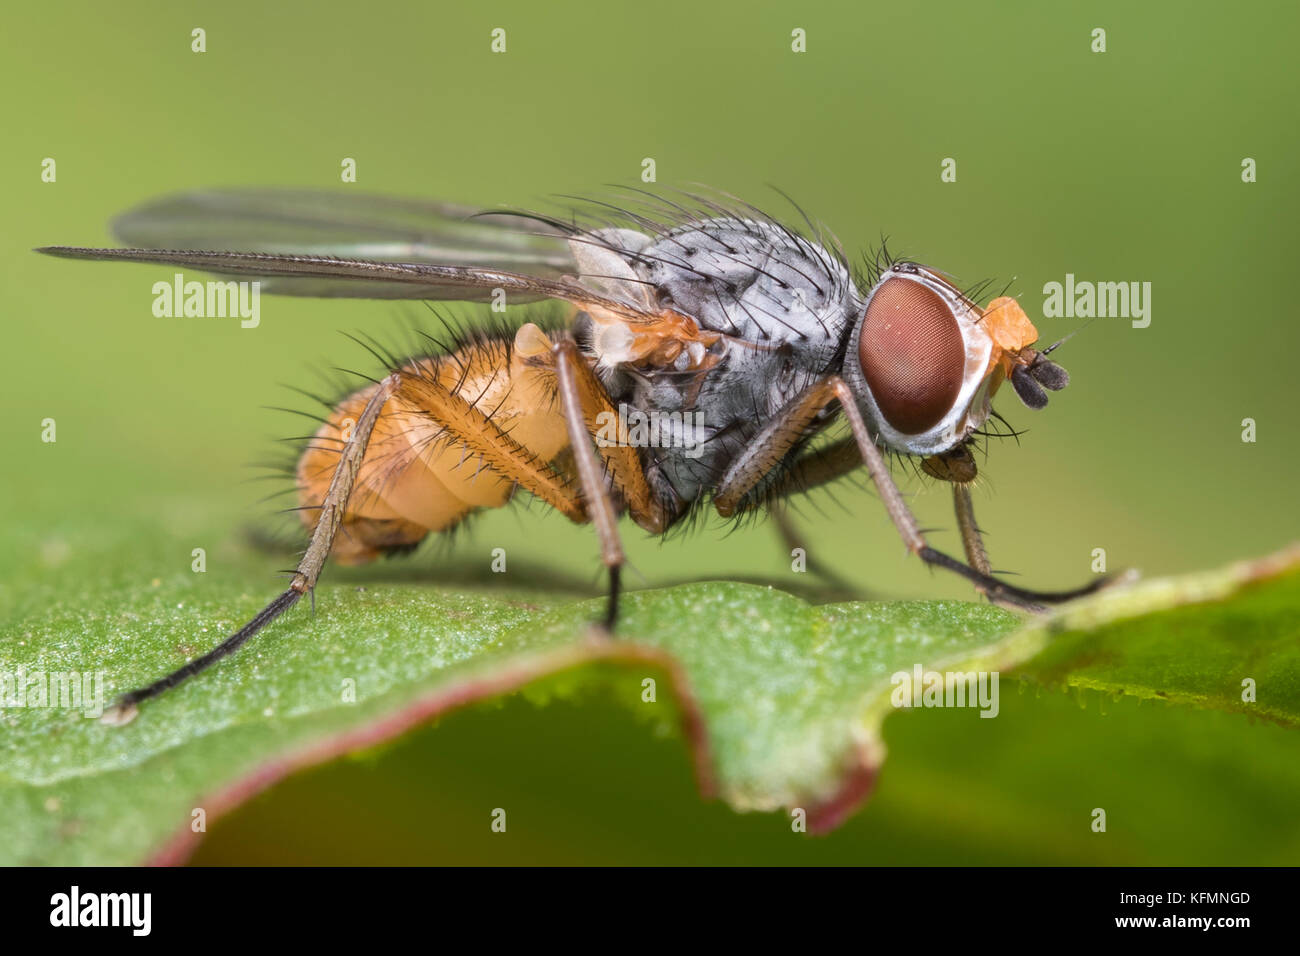 Colourful fly resting on leaf. Tipperary, Ireland Stock Photo